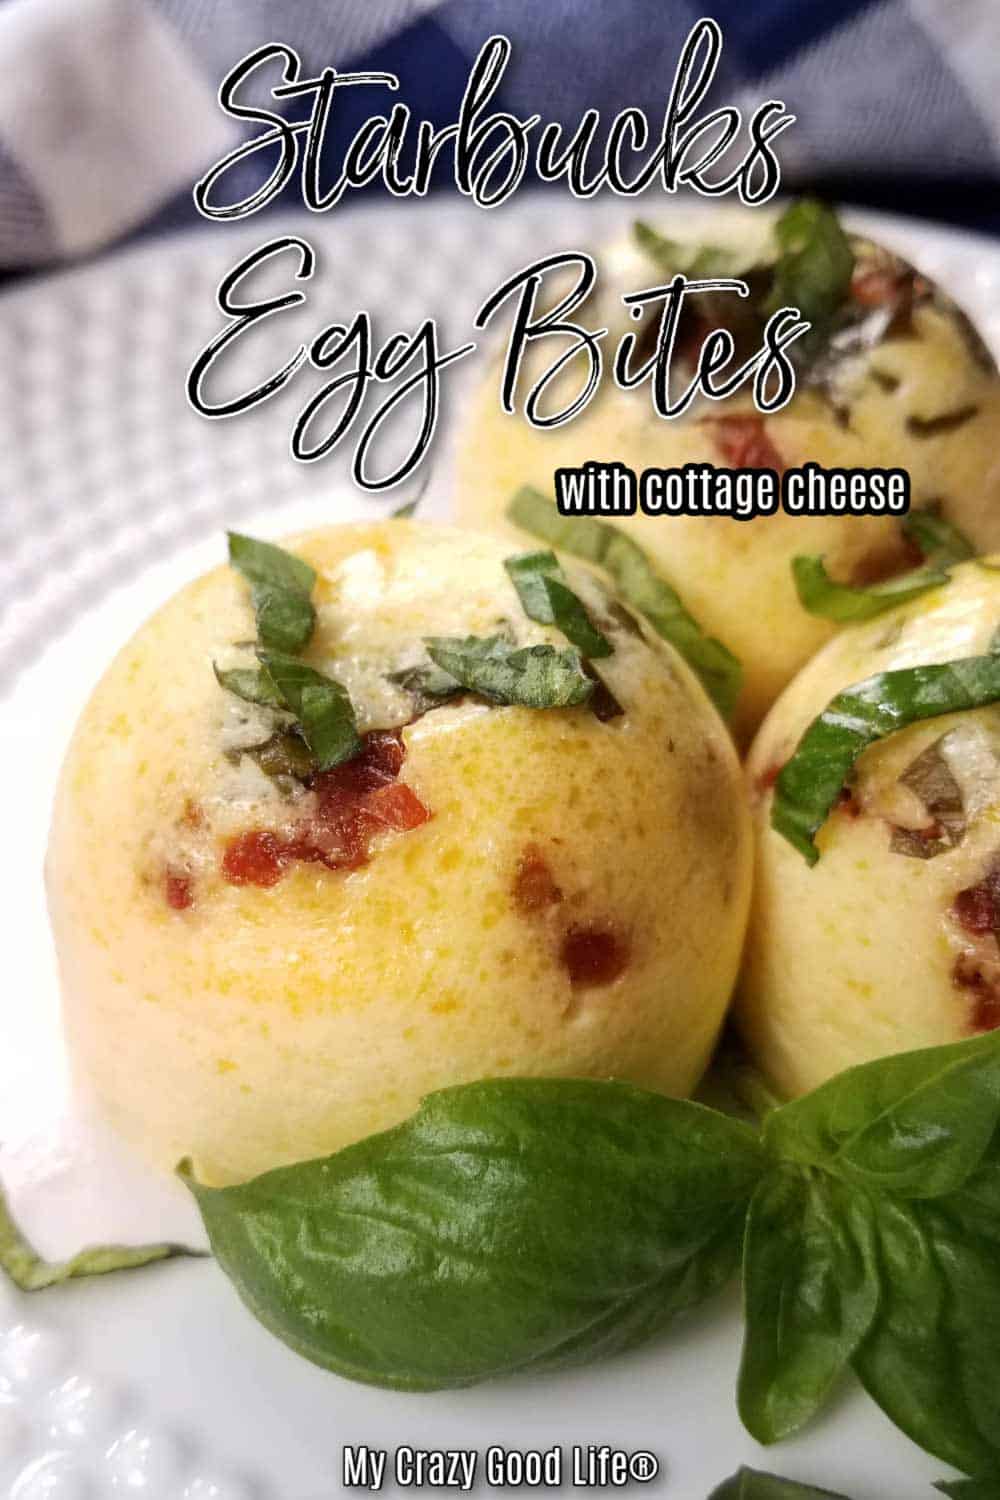 These copycat Starbucks Egg Bites are so delicious and easy to make in your Instant Pot! Save a ton of money by making these healthy egg bites at home. Instead of heavy creams and cheeses, these are made with cottage cheese and Greek yogurt.